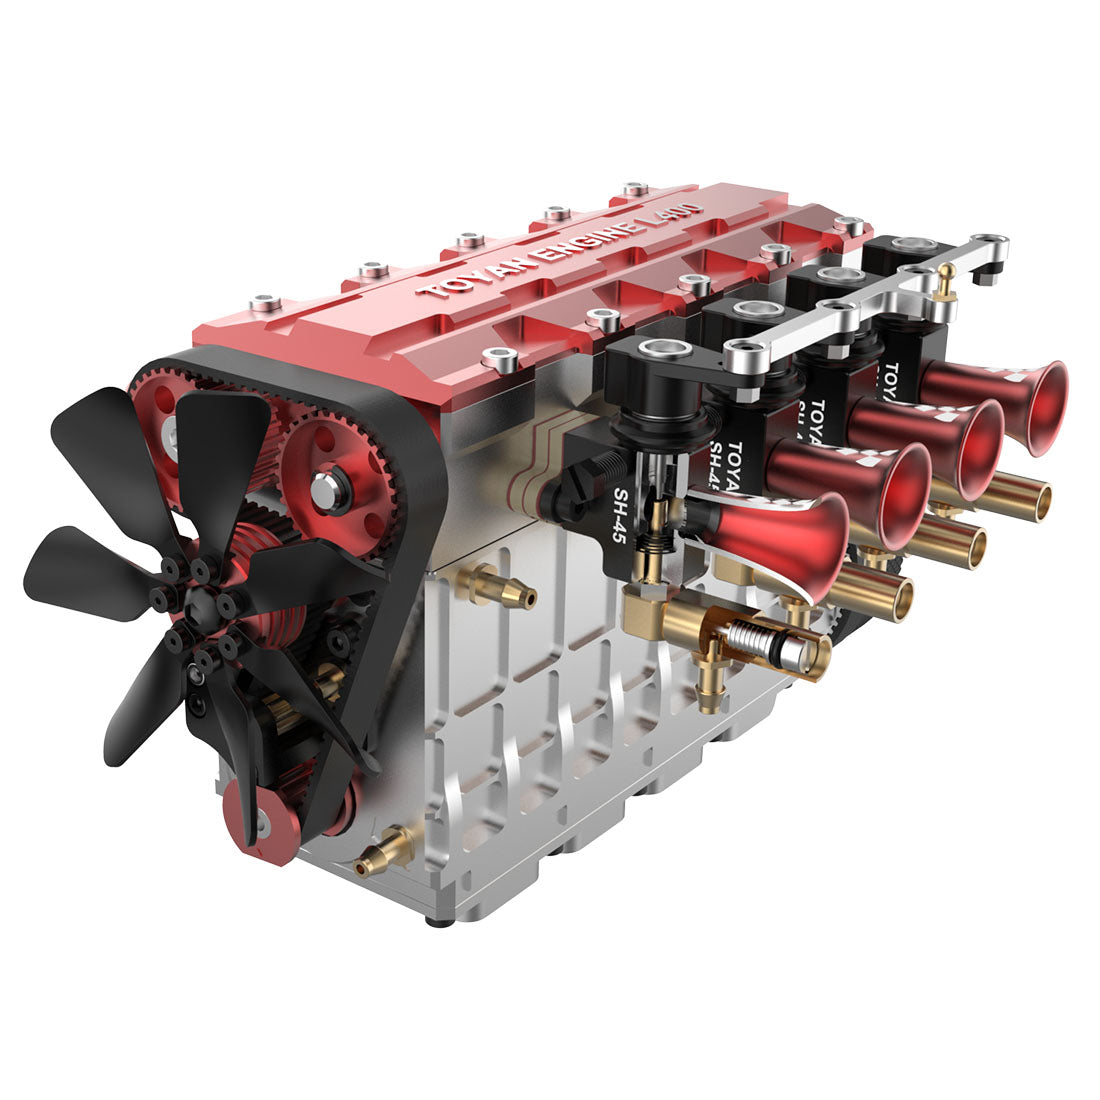 FS-L400 14cc Inline 4 Cylinder Four-stroke Water-cooled Nitro Engine Model for 1:8 1:10 RC Car Ship Airplane